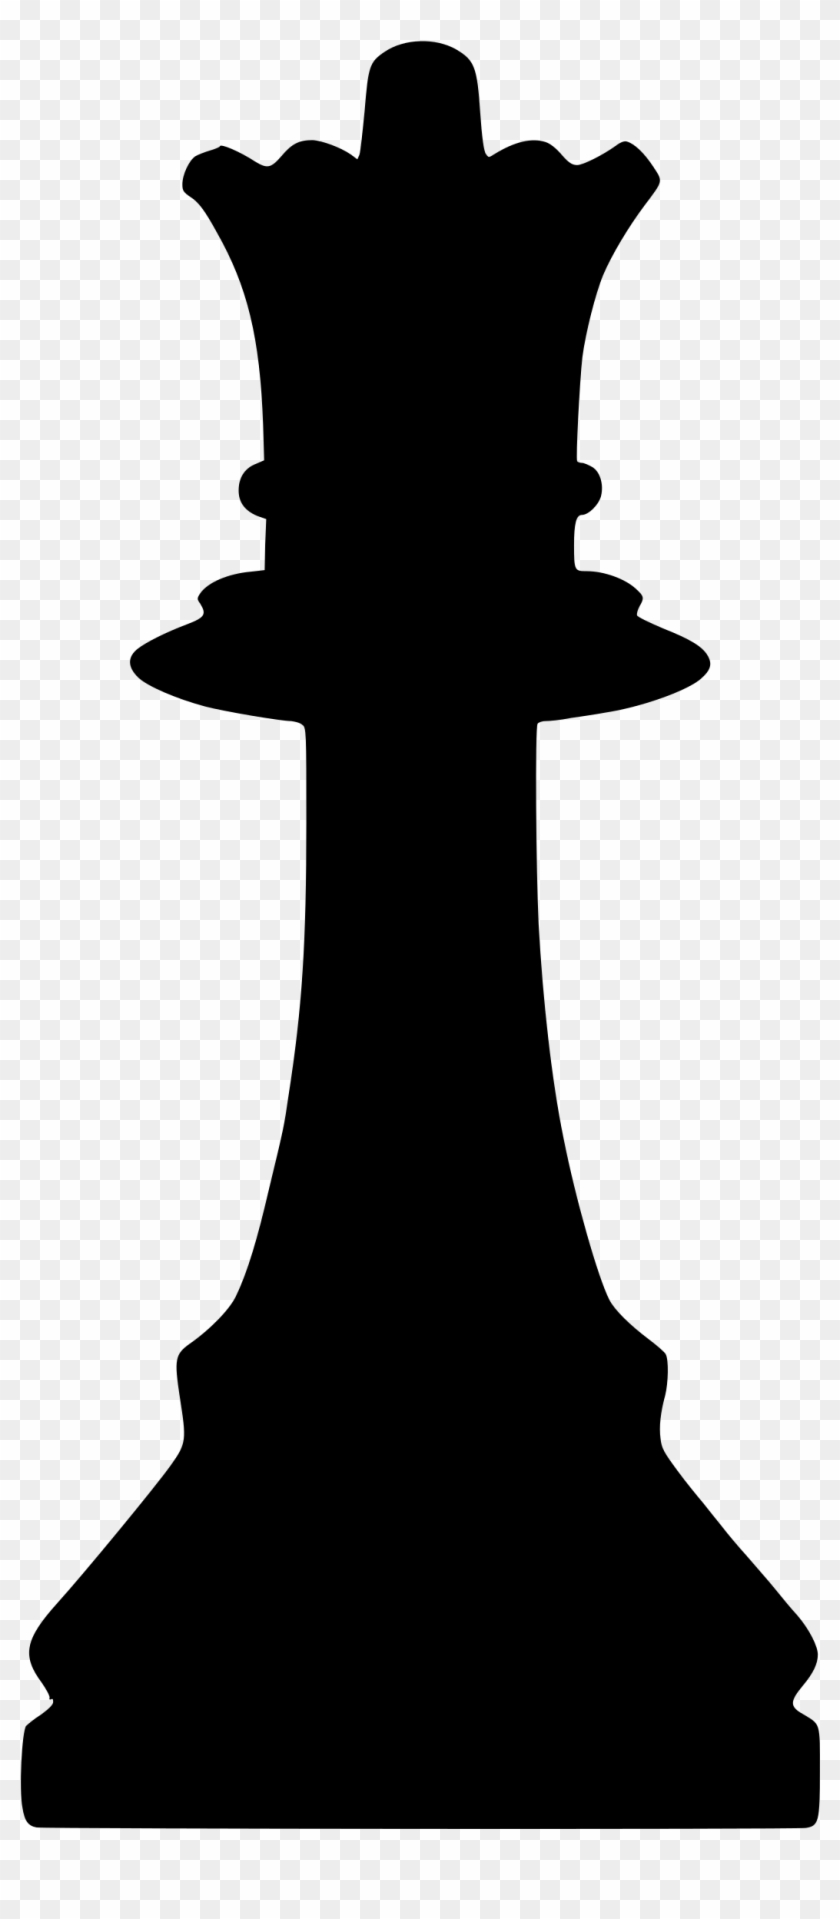 Chess Piece PNG Transparent Images Free Download, Vector Files